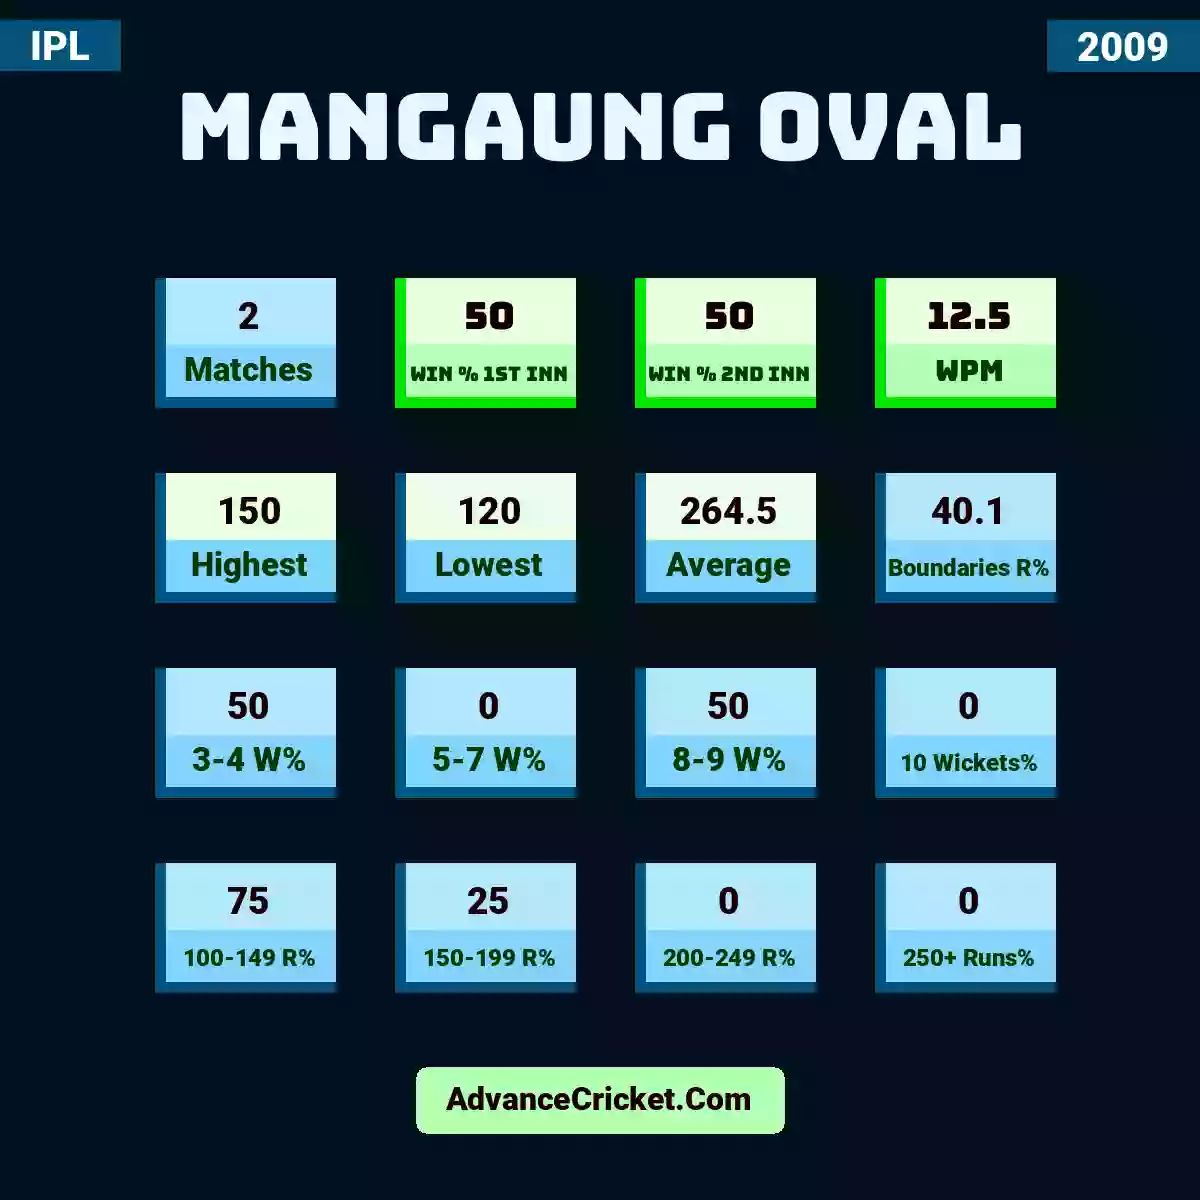 Image showing Mangaung Oval with Matches: 2, Win % 1st Inn: 50, Win % 2nd Inn: 50, WPM: 12.5, Highest: 150, Lowest: 120, Average: 264.5, Boundaries R%: 40.1, 3-4 W%: 50, 5-7 W%: 0, 8-9 W%: 50, 10 Wickets%: 0, 100-149 R%: 75, 150-199 R%: 25, 200-249 R%: 0, 250+ Runs%: 0.